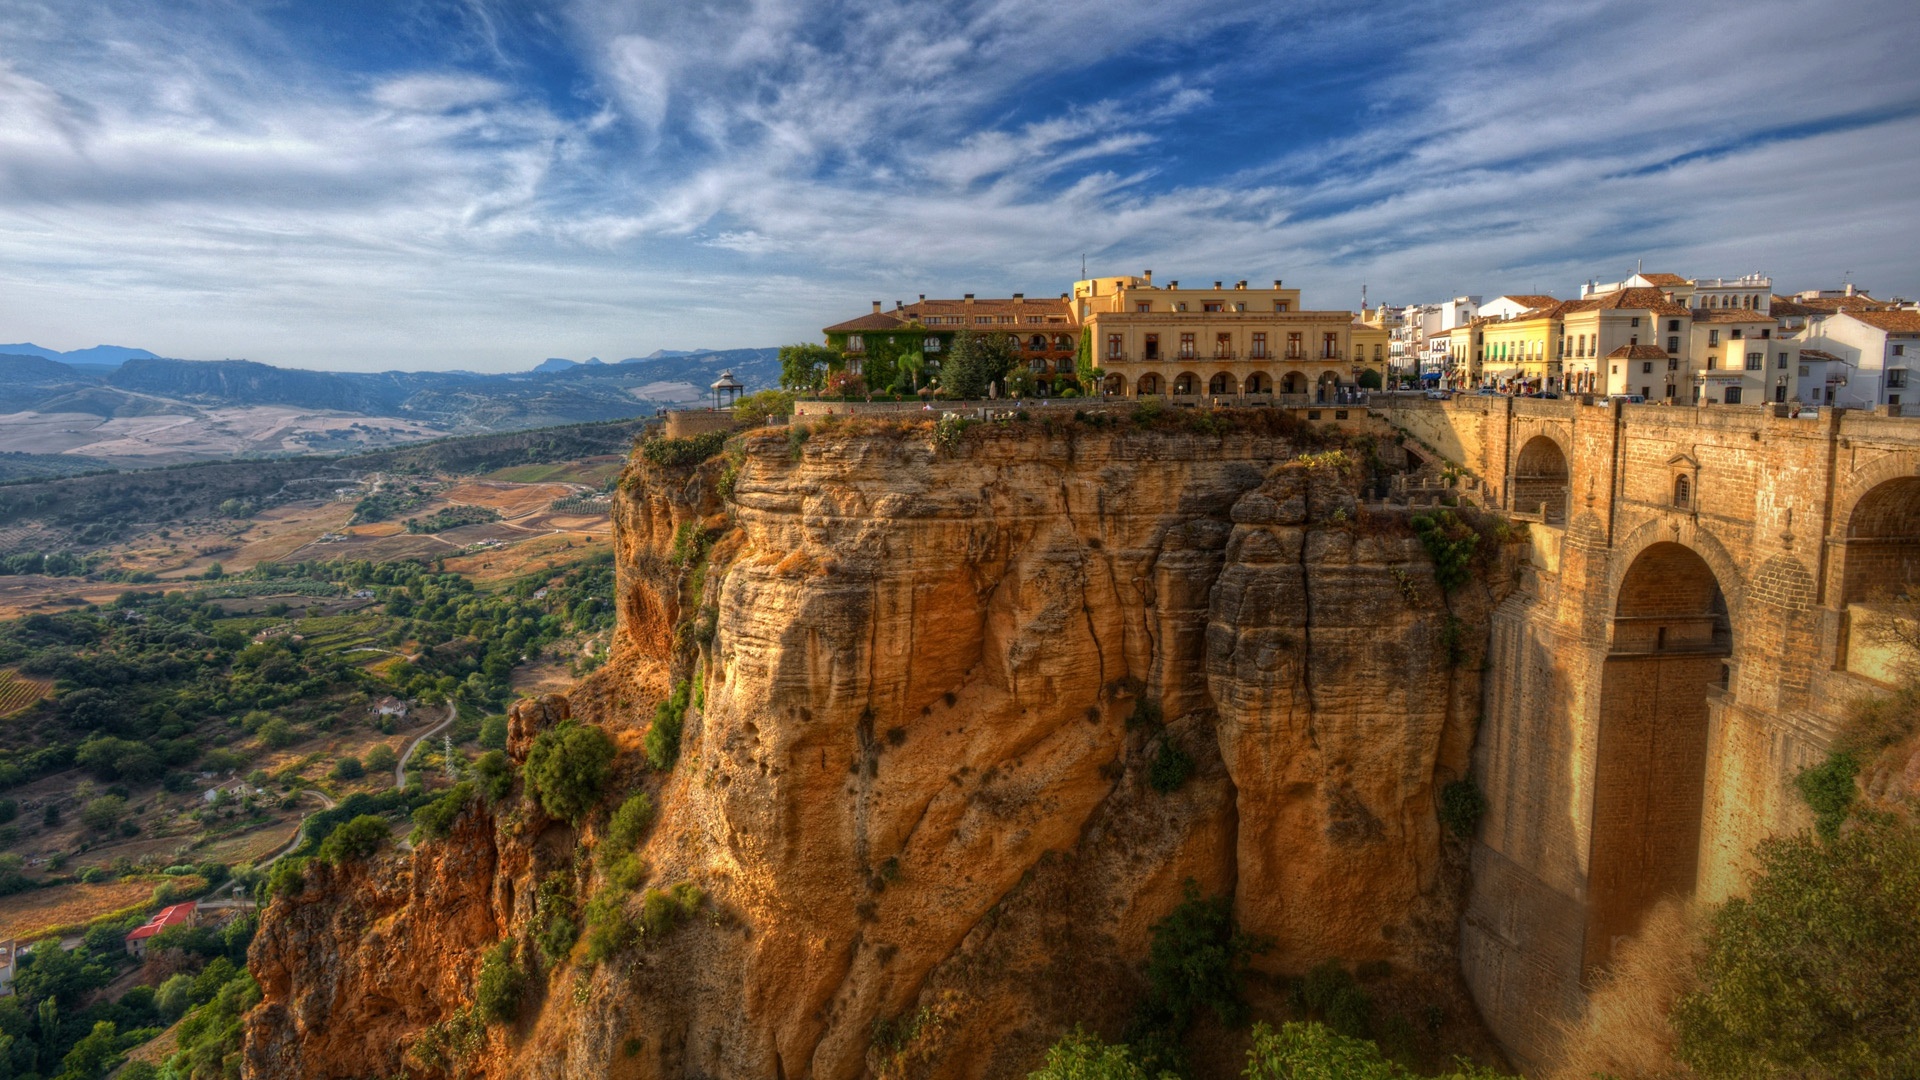 andalusia, man made, town, house, mountain, spain, towns